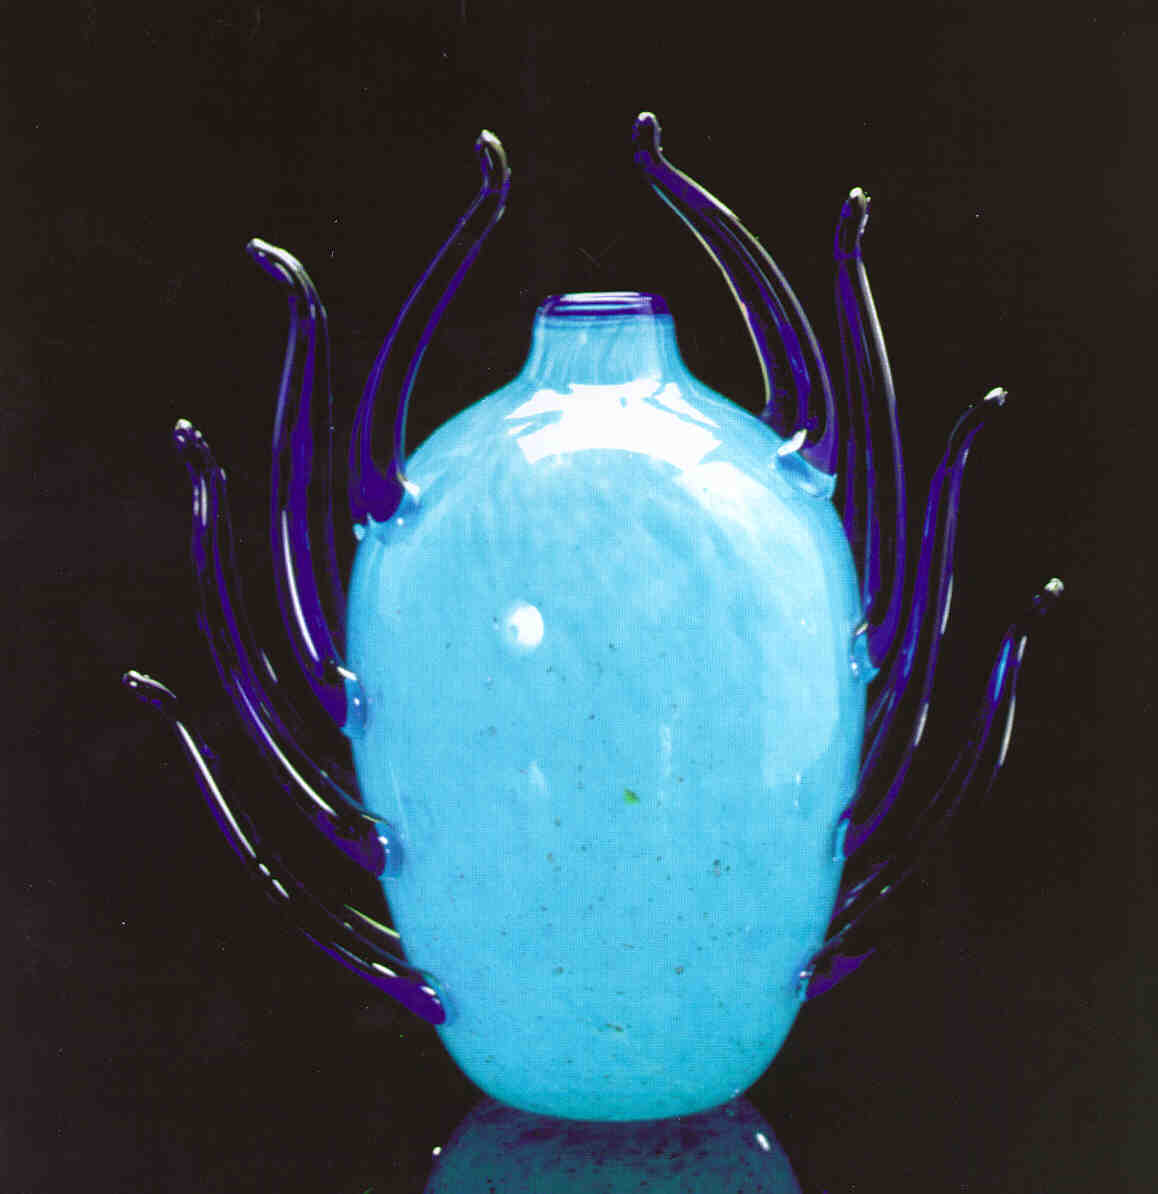  Dale Chihuly,&nbsp; Marbled Sky Blue Piccolo Venetian with Cobalt Blue Handles &nbsp;(1994, glass, 10 x 9 x 5 inches) 